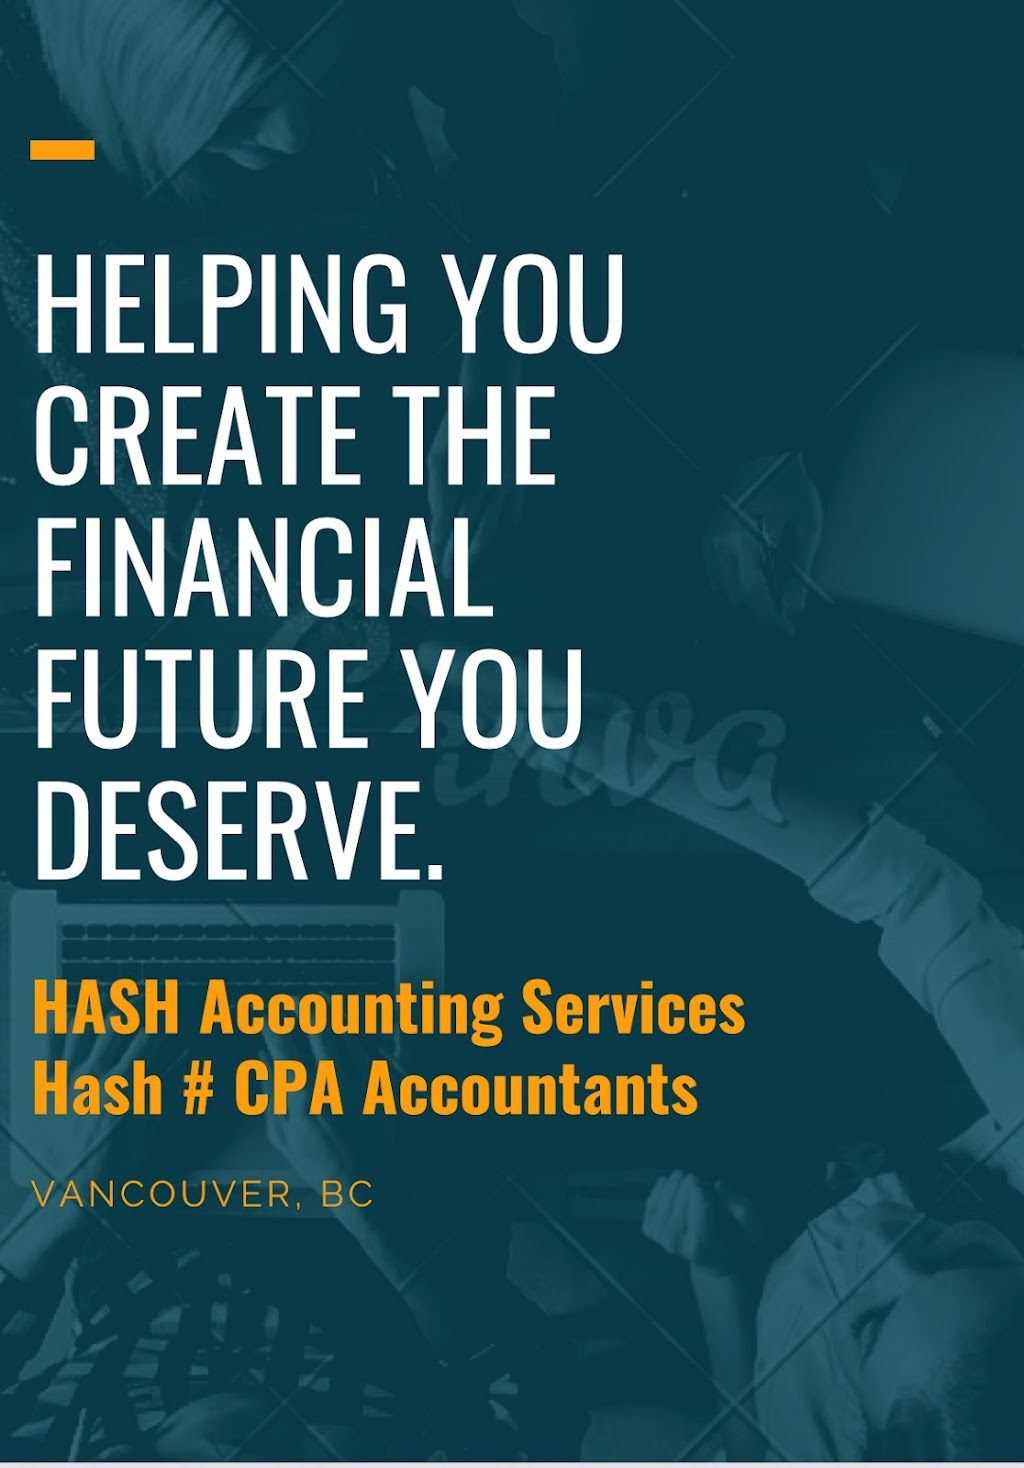 Hash Accounting Services & Co | 9491 No. 3 Rd, Richmond, BC V7A 1W2, Canada | Phone: (778) 239-1066